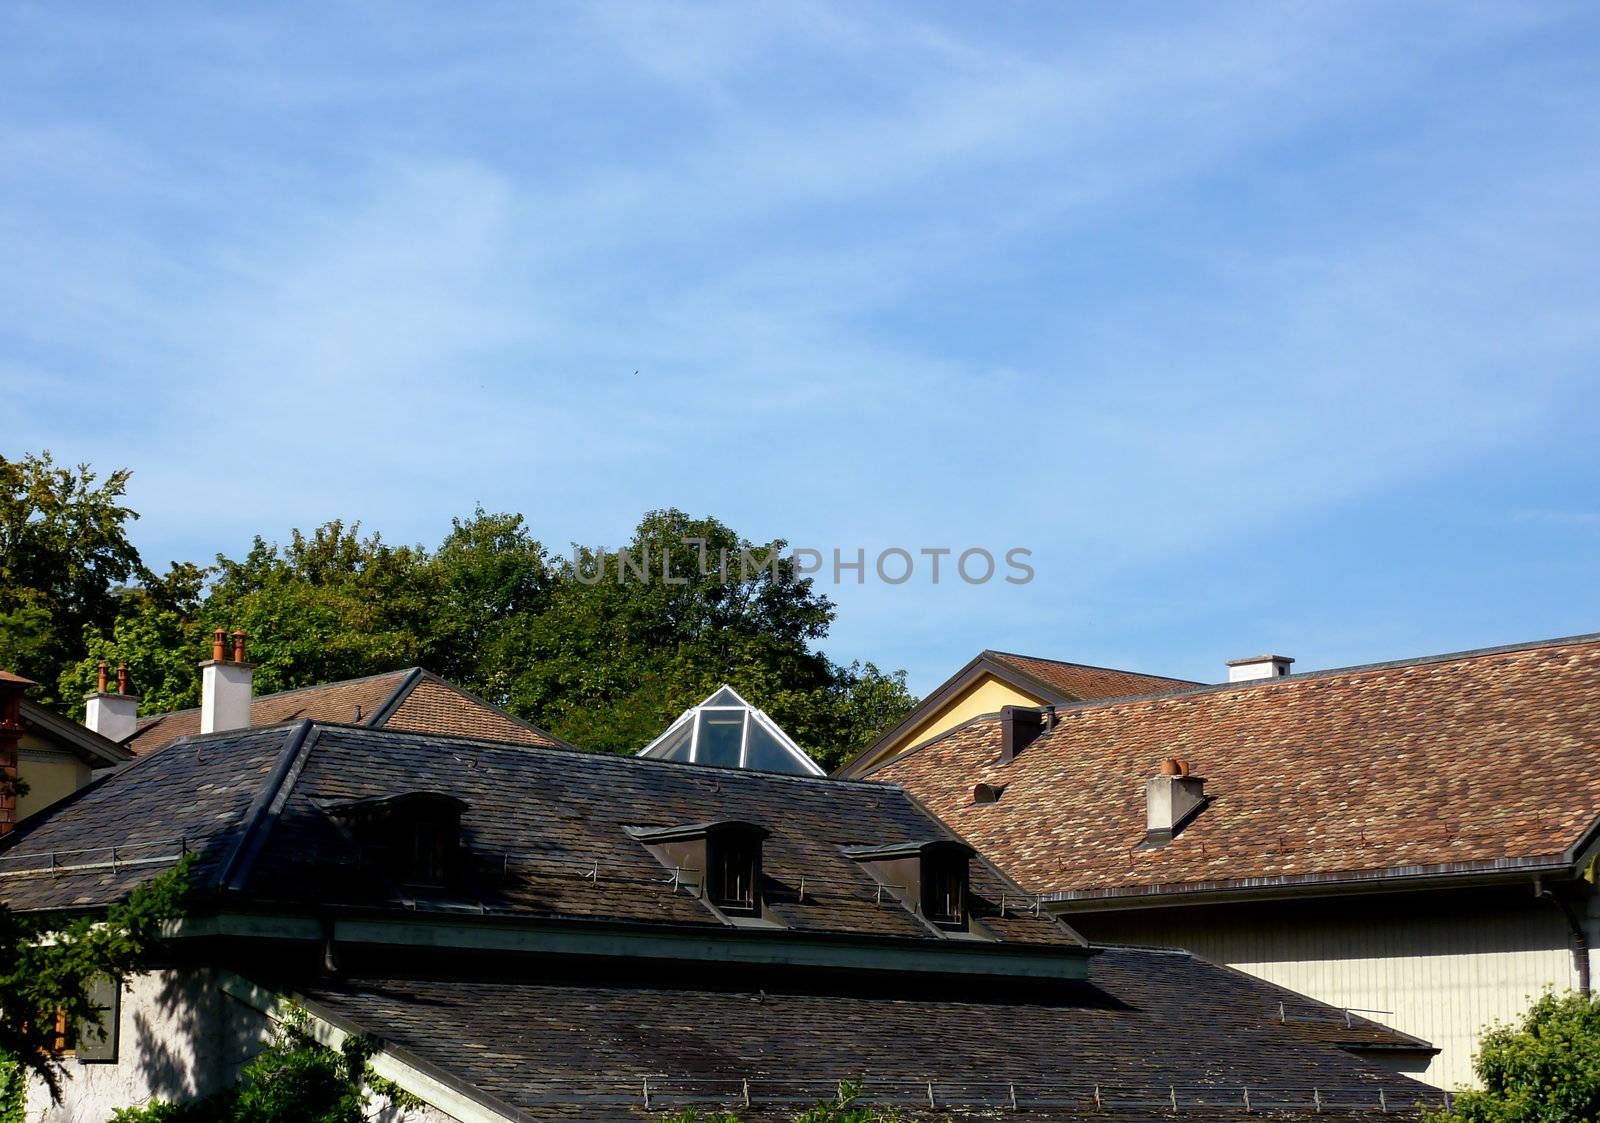 Roofs by Elenaphotos21